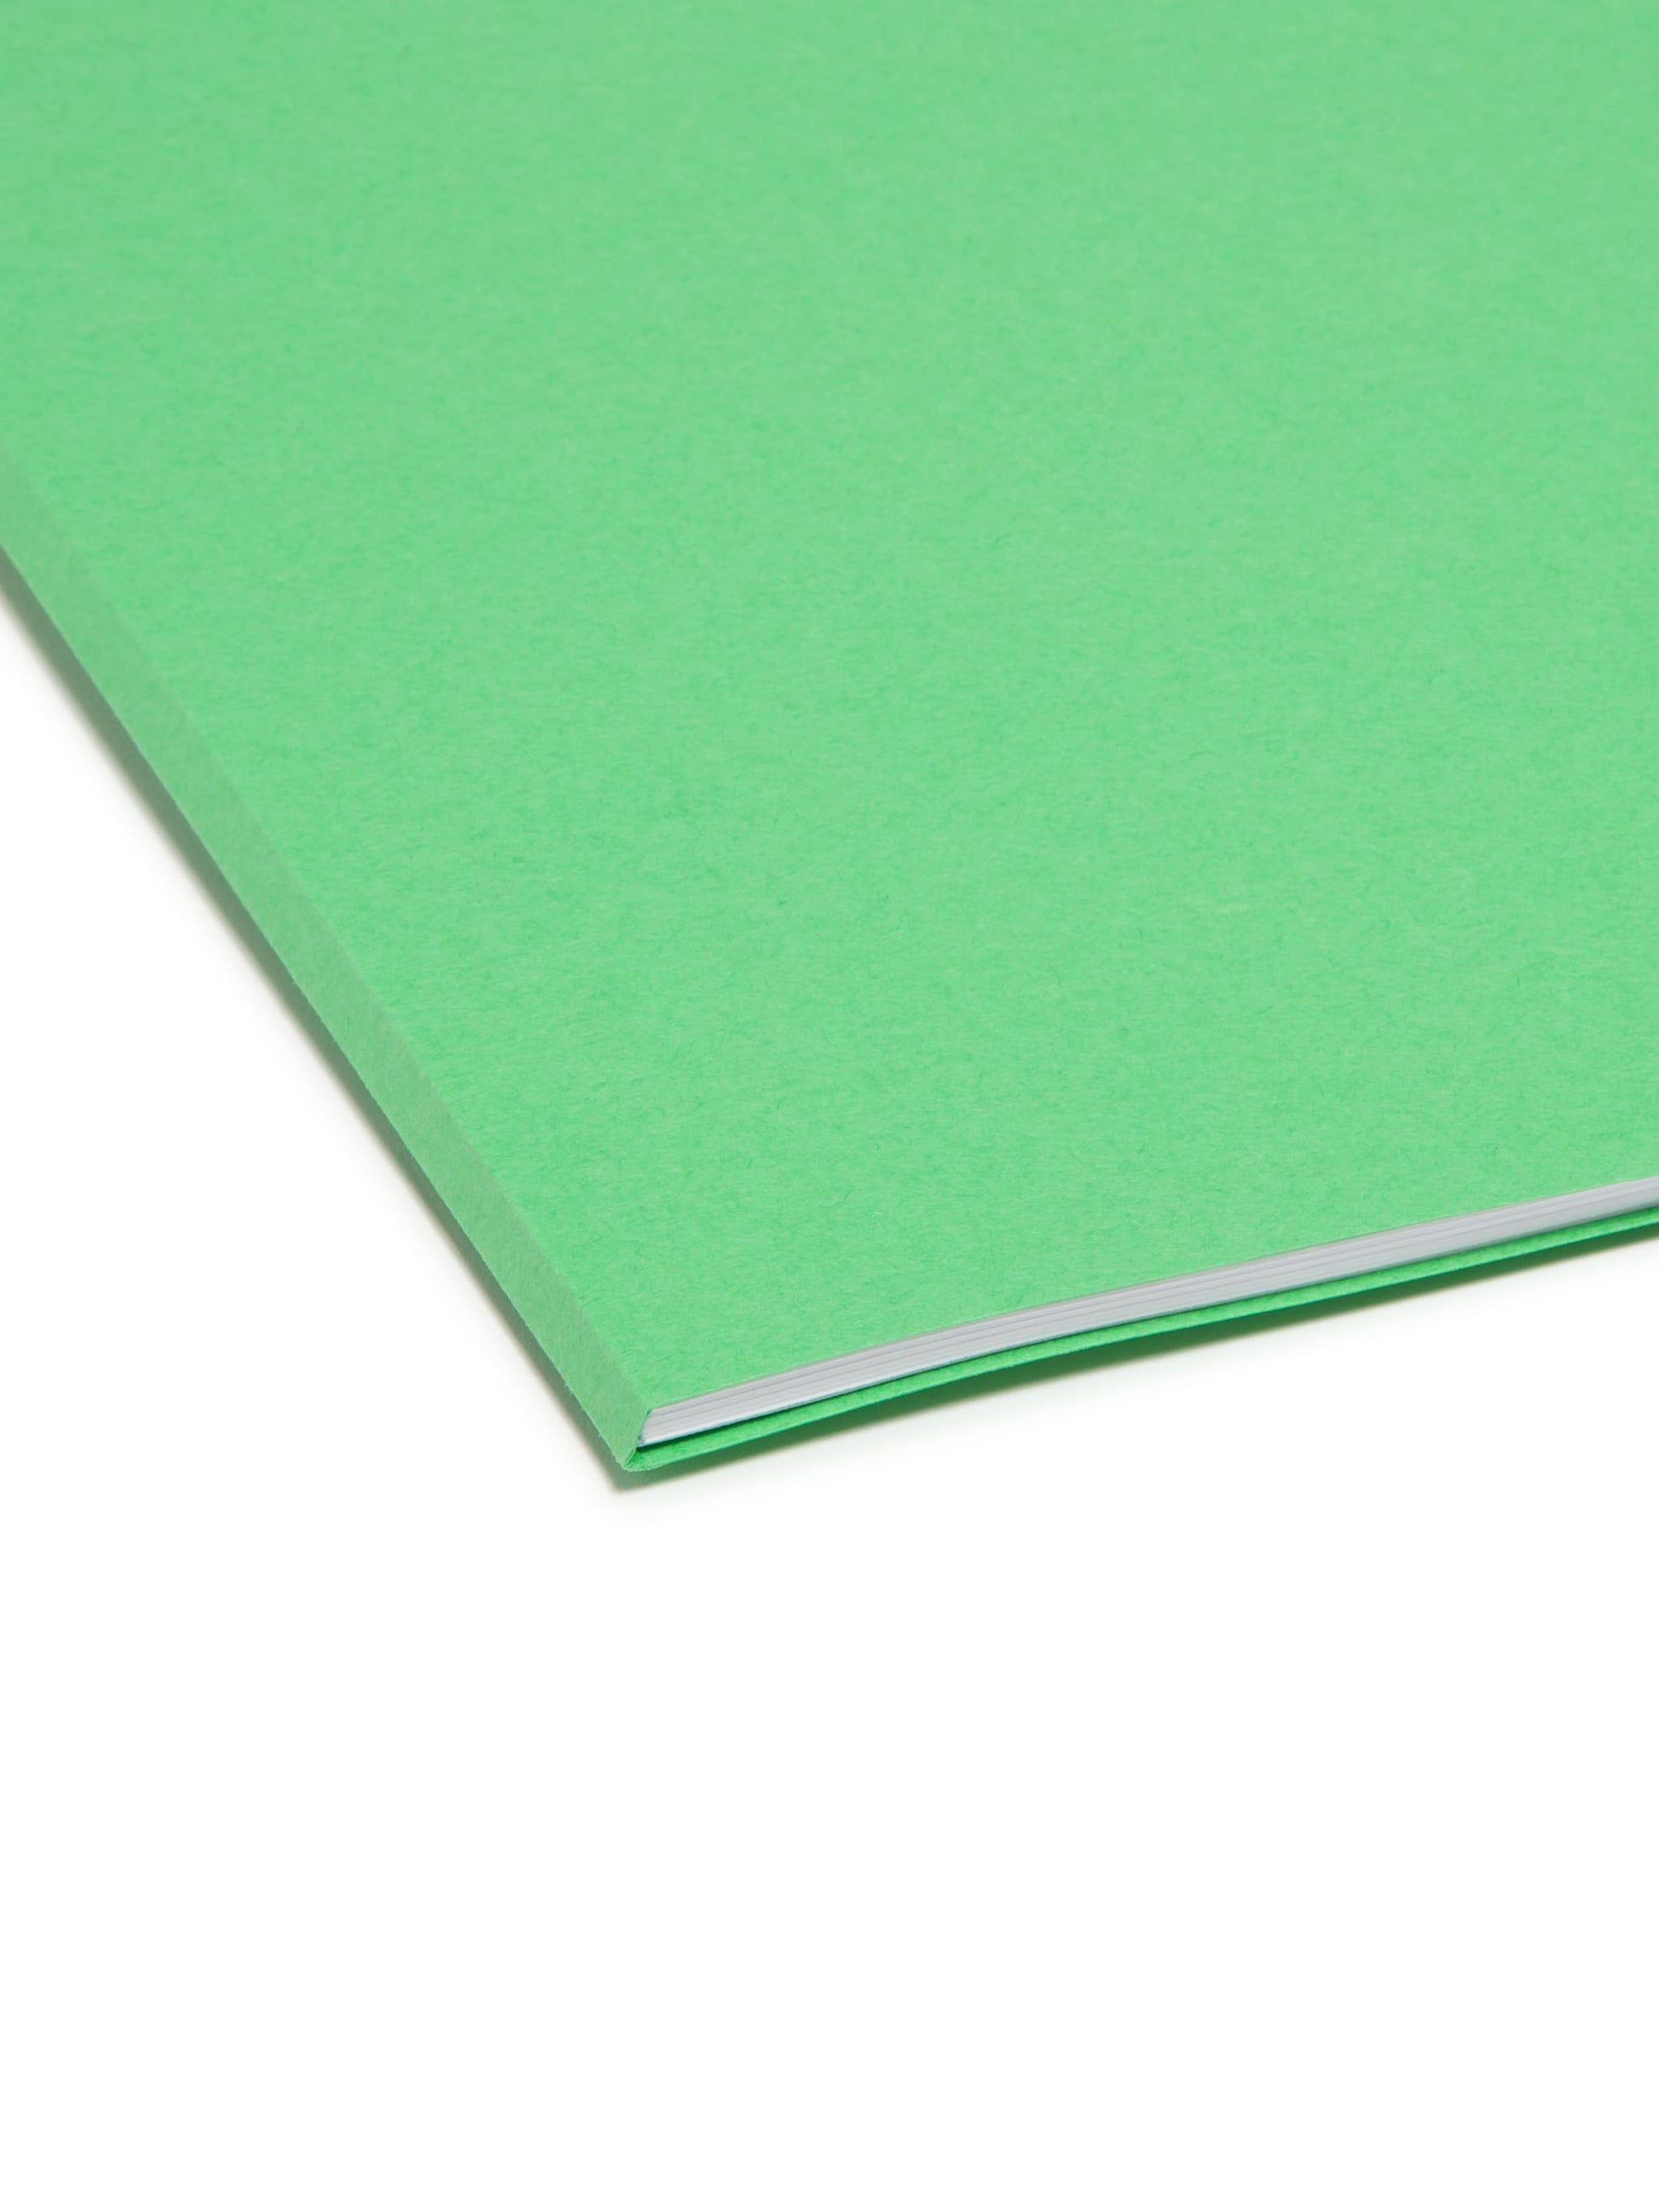 WaterShed®/CutLess® Reversible Printed Tab File Folders, Assorted Colors Color, Letter Size, 086486119580